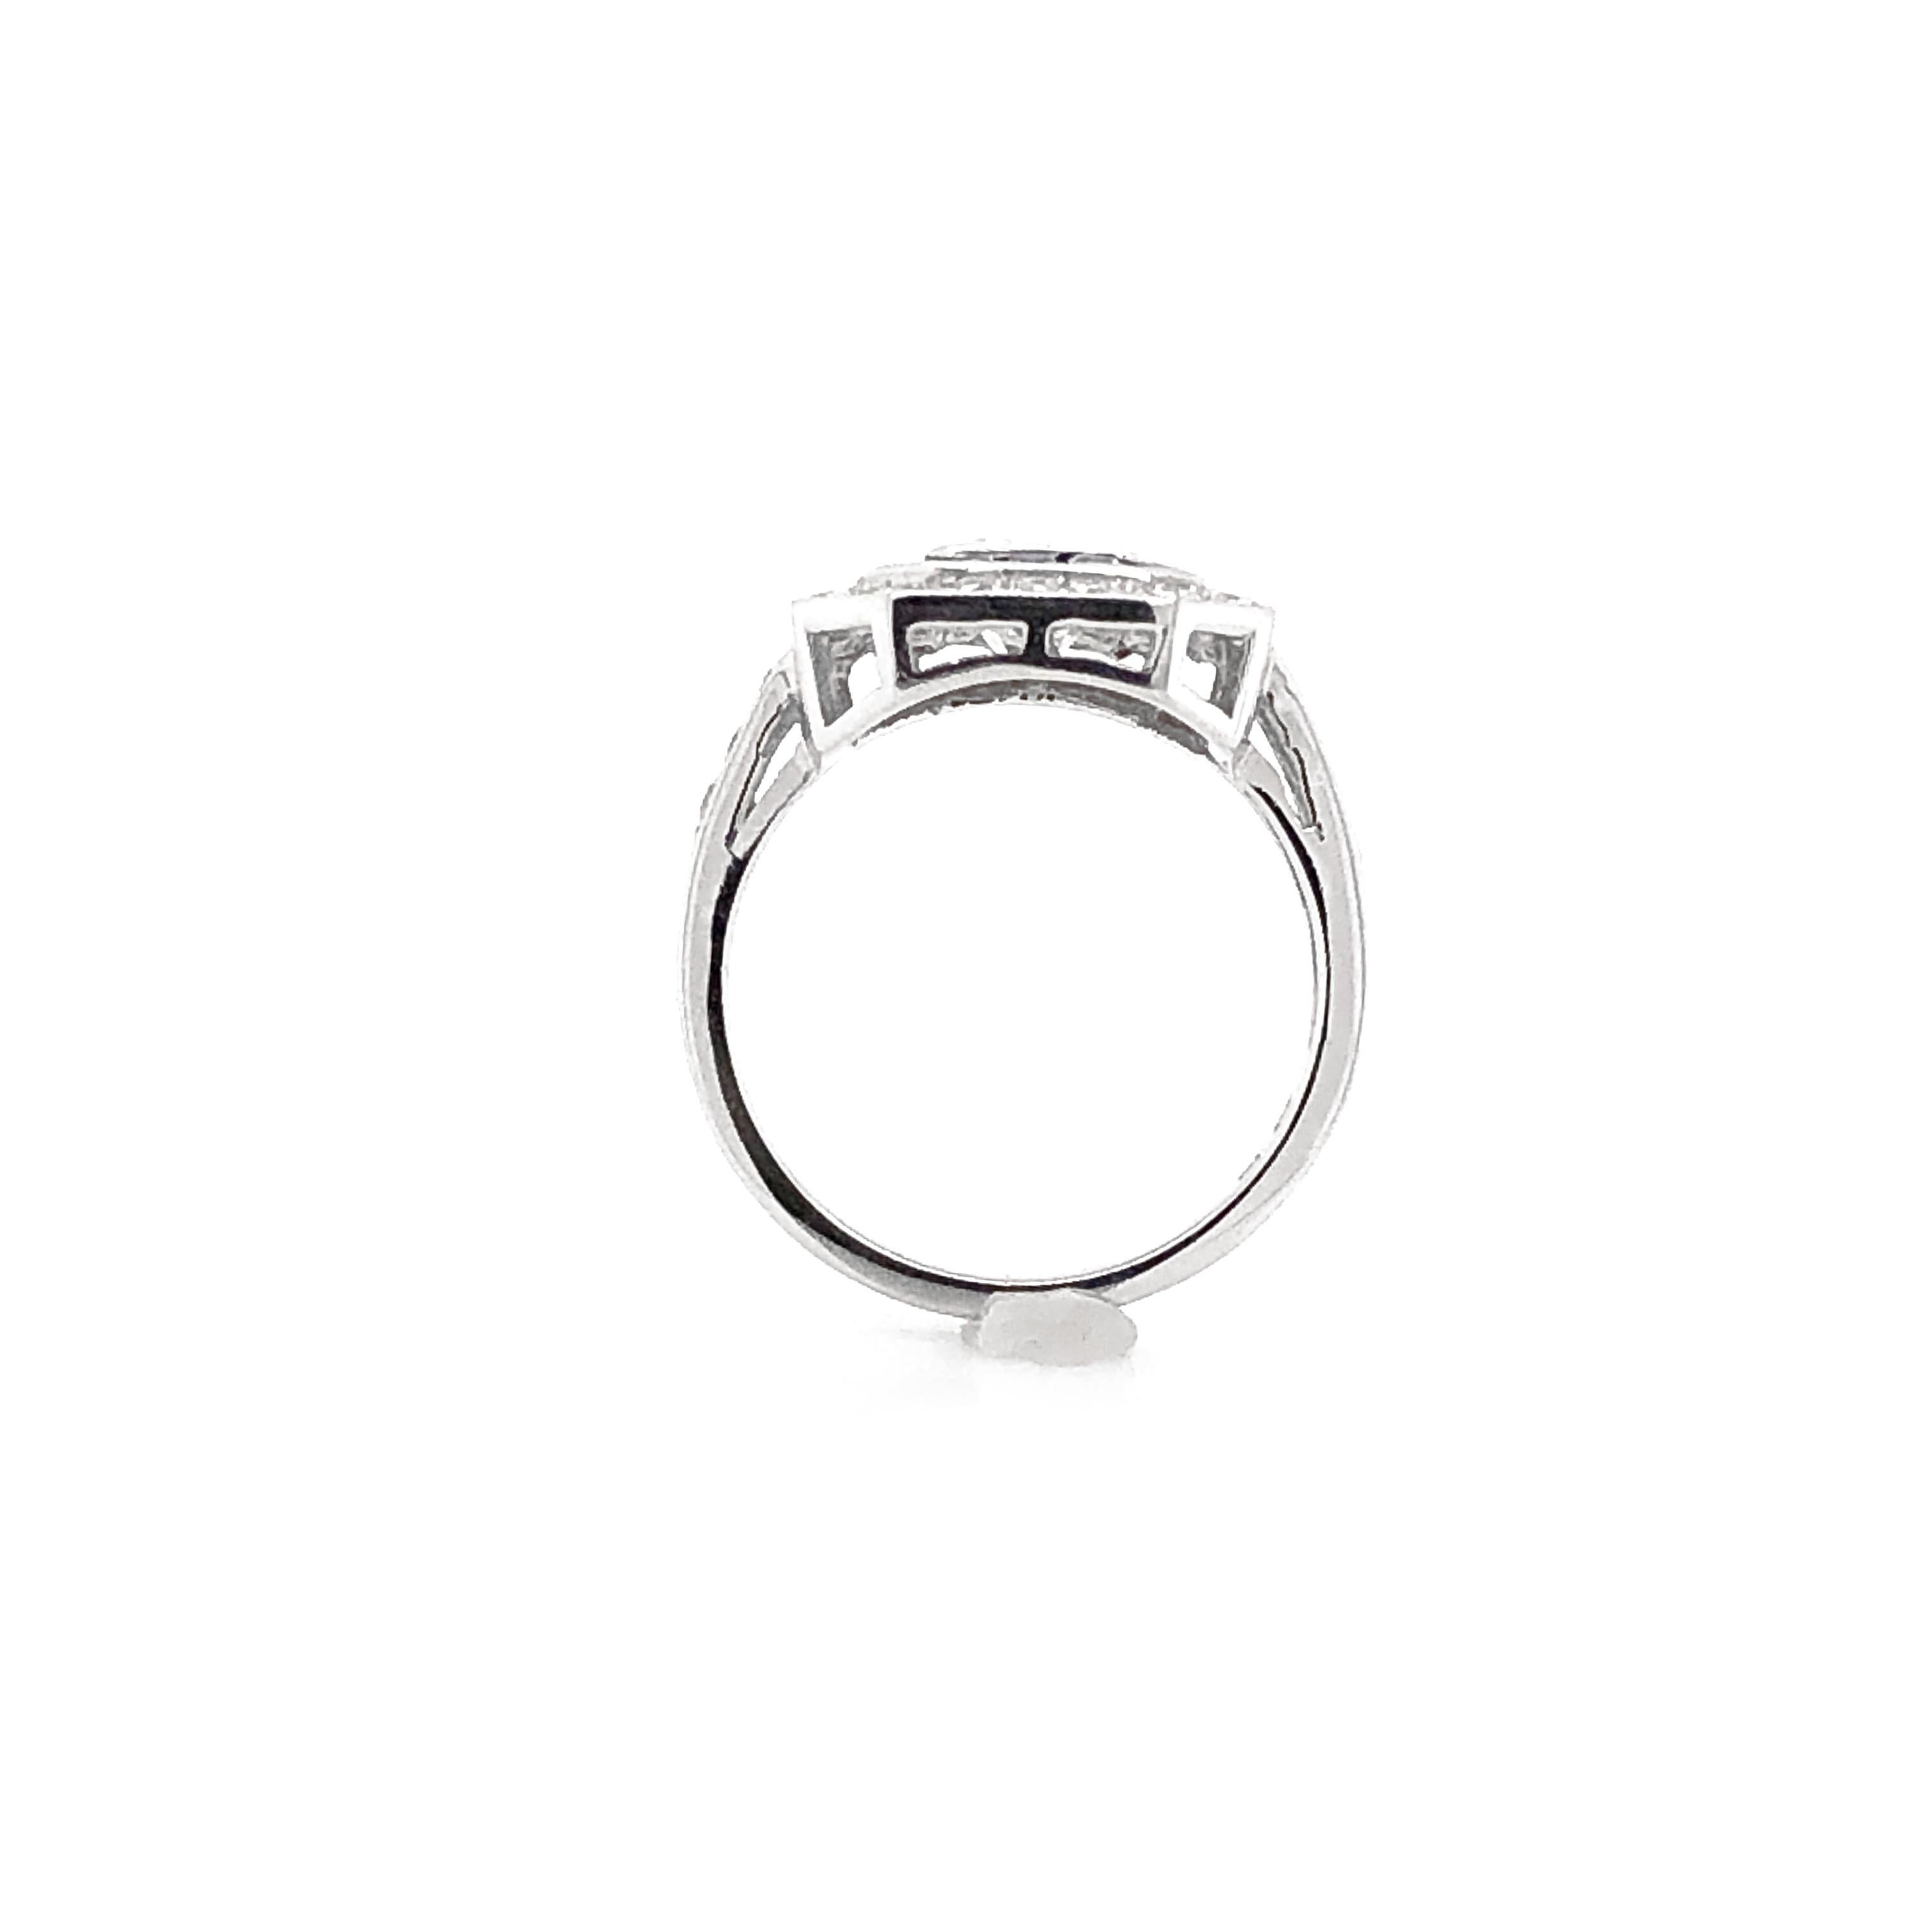 GIA Certified Emerald Cut Diamond 1.01 Carat Sapphires Diamonds Cocktail Ring For Sale 3